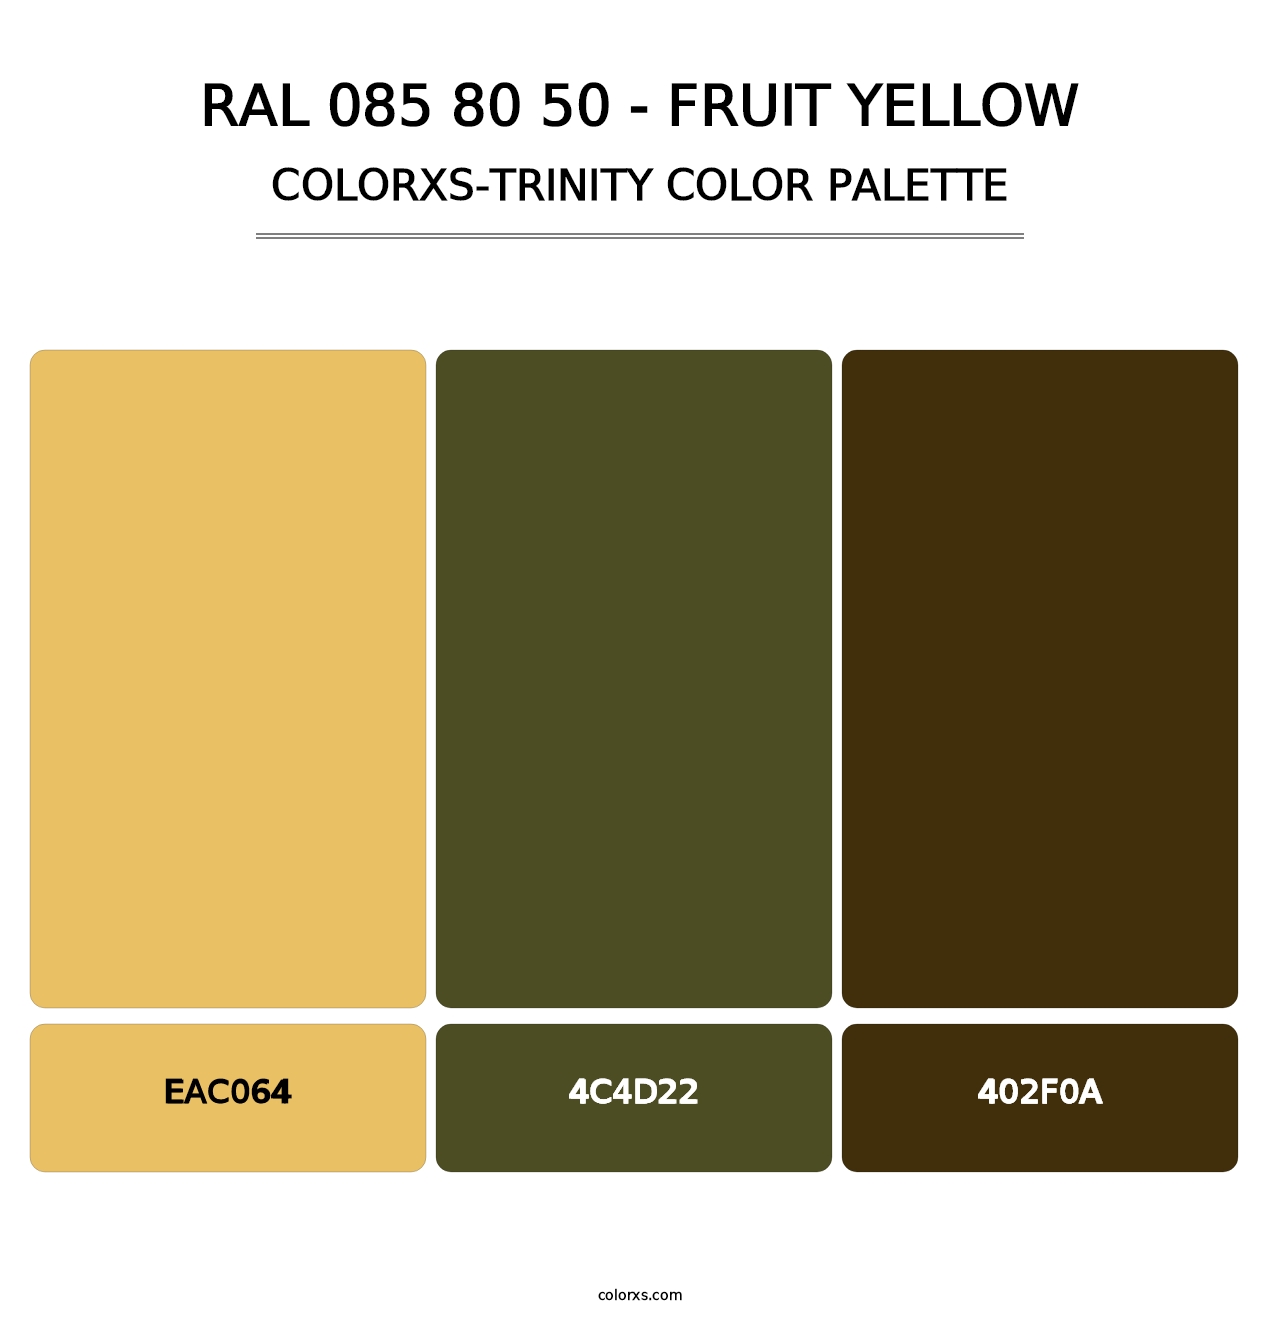 RAL 085 80 50 - Fruit Yellow - Colorxs Trinity Palette